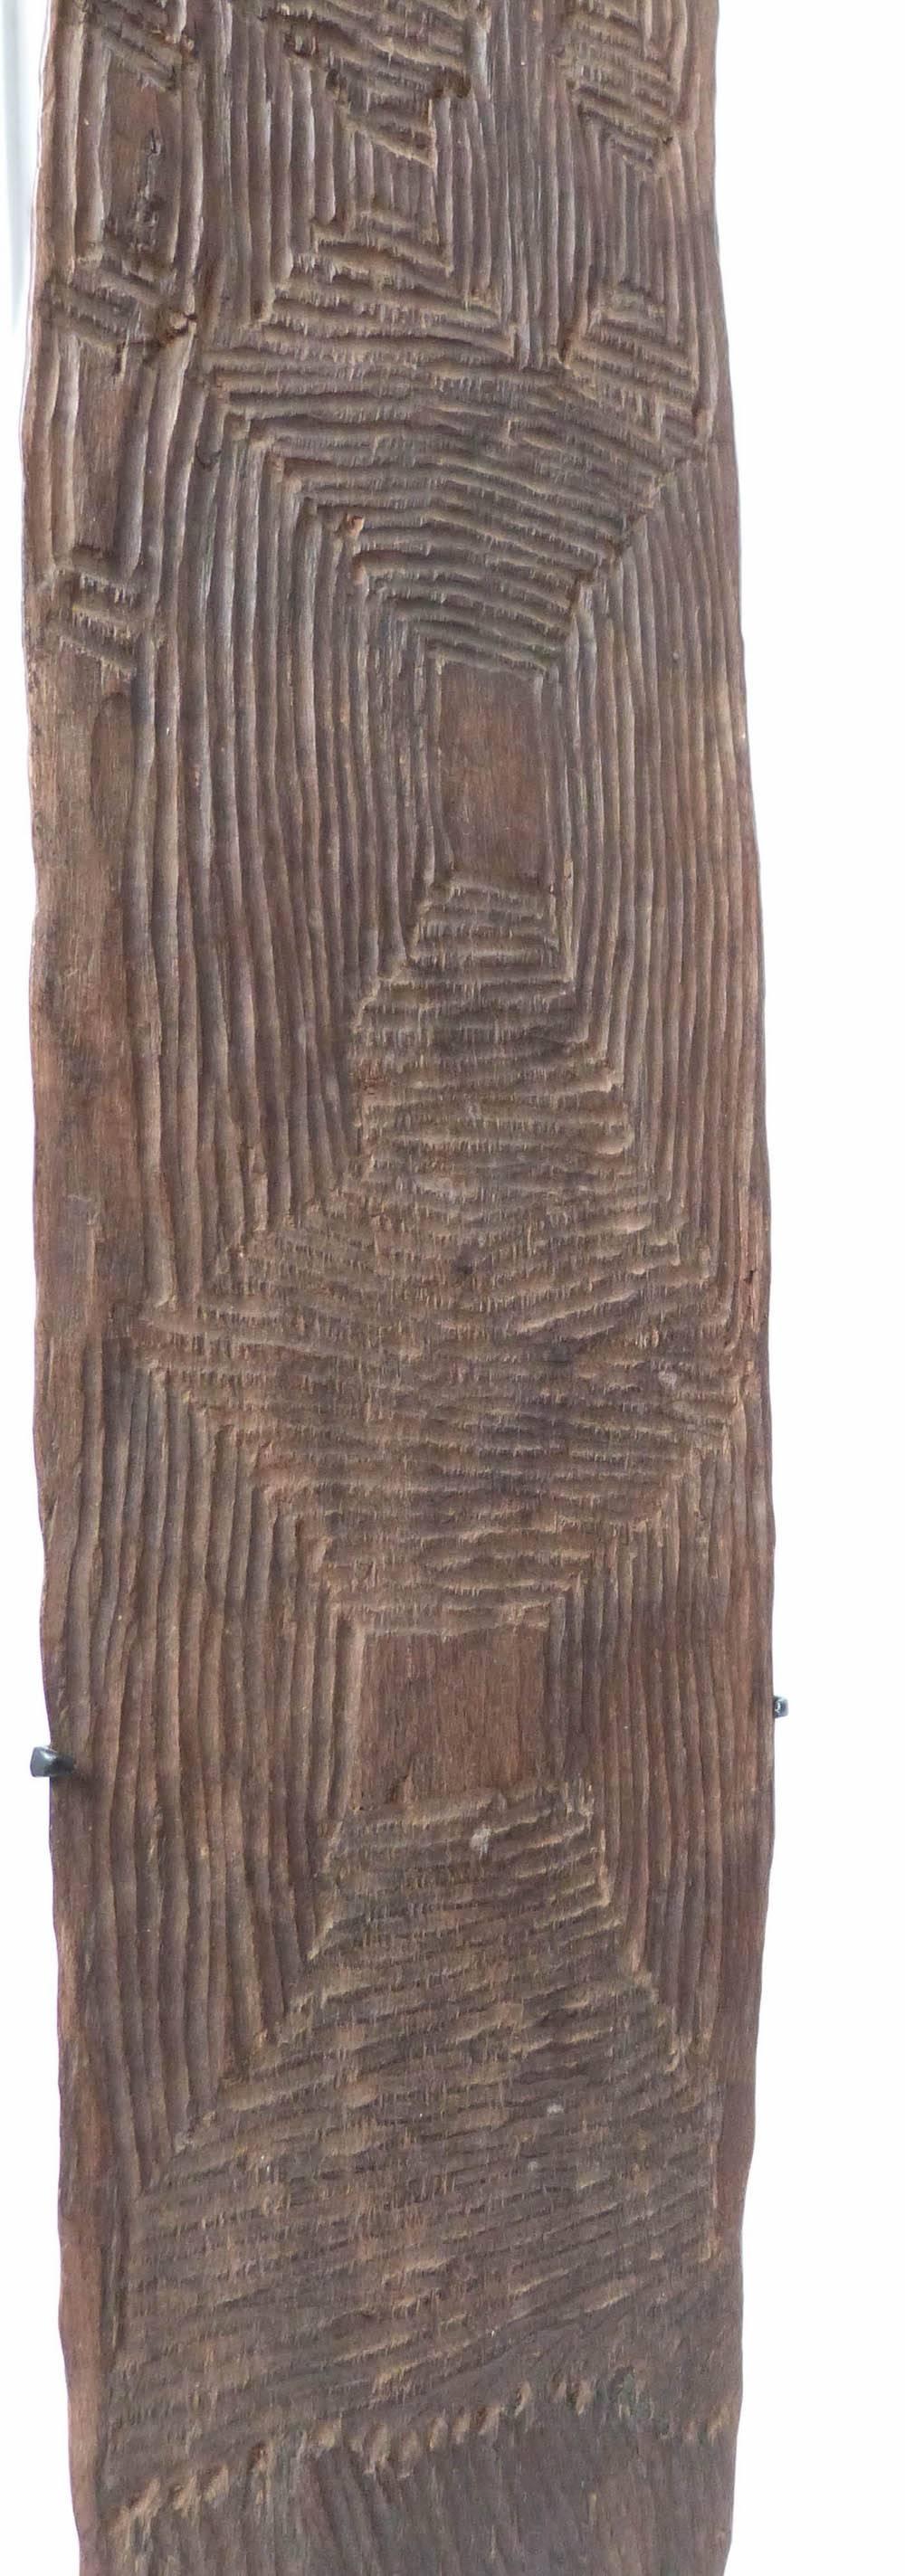 A lovely old Churinga, fine soft patina on both sides from rubbing during Aboriginal ceremonies. Deep vertical and linear carved design, done with a possum tooth or kangaroo claw. Traces of red ochre wash.
Churingas were sacred totemic items rarely